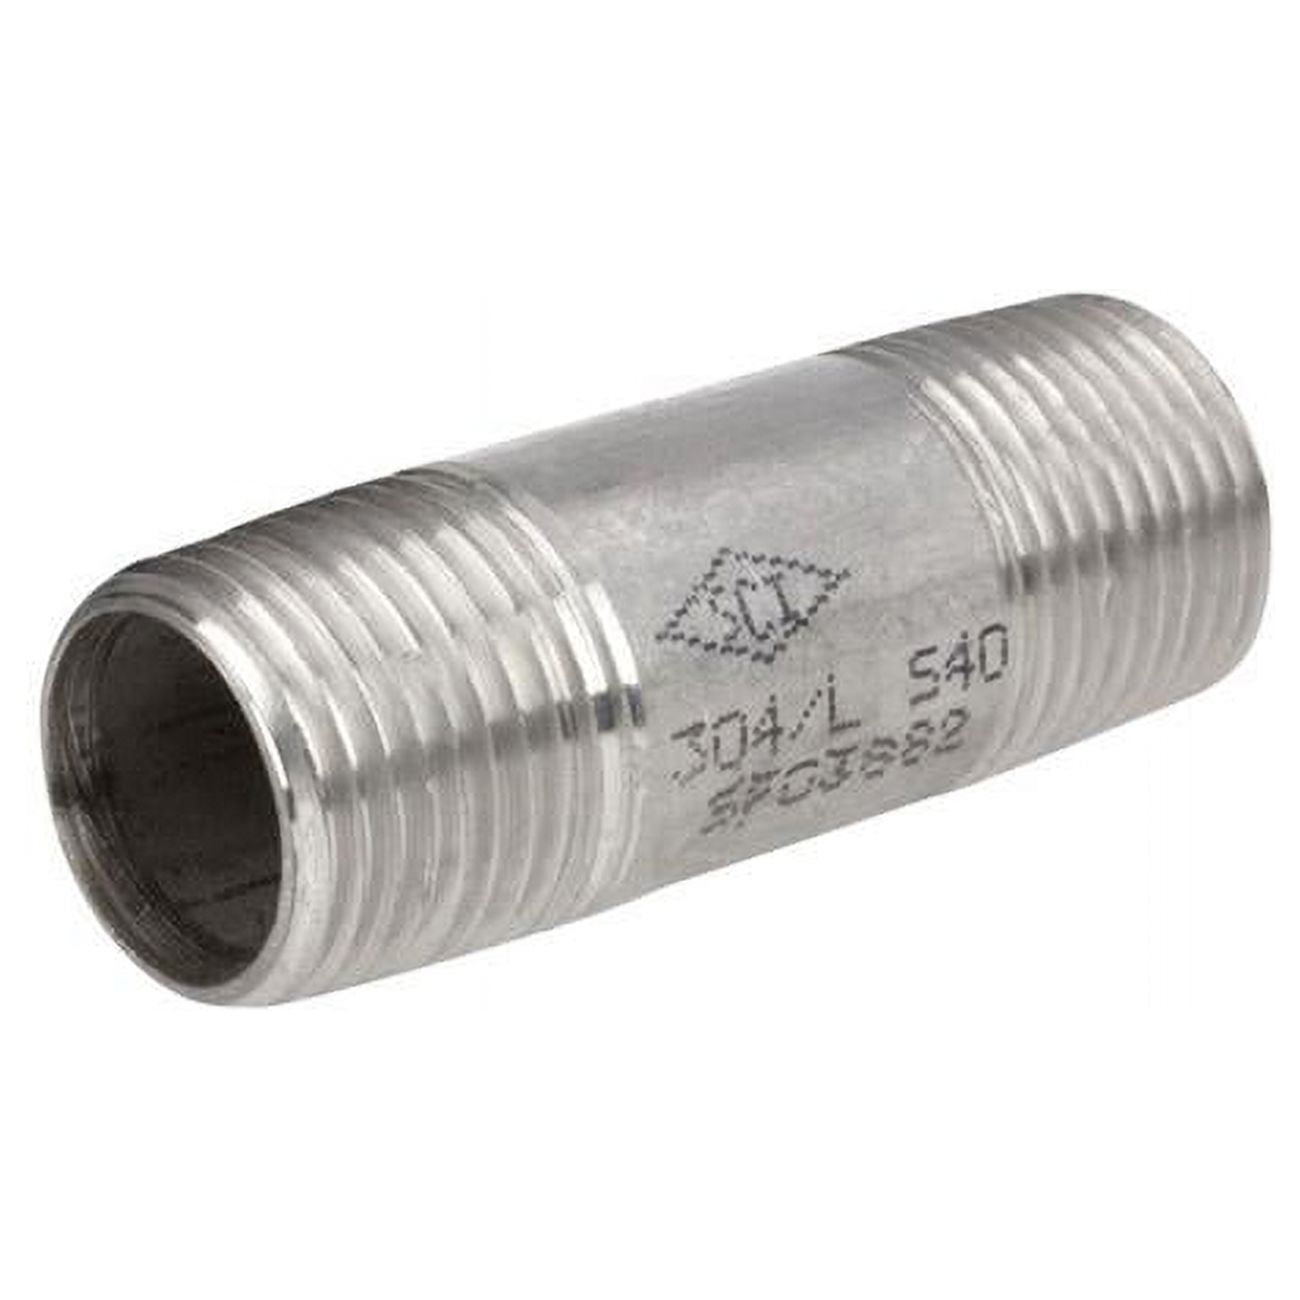 4809885 Stainless Steel Pipe Nipple - 1.25 In. 1.25 Dia. X 2 In.